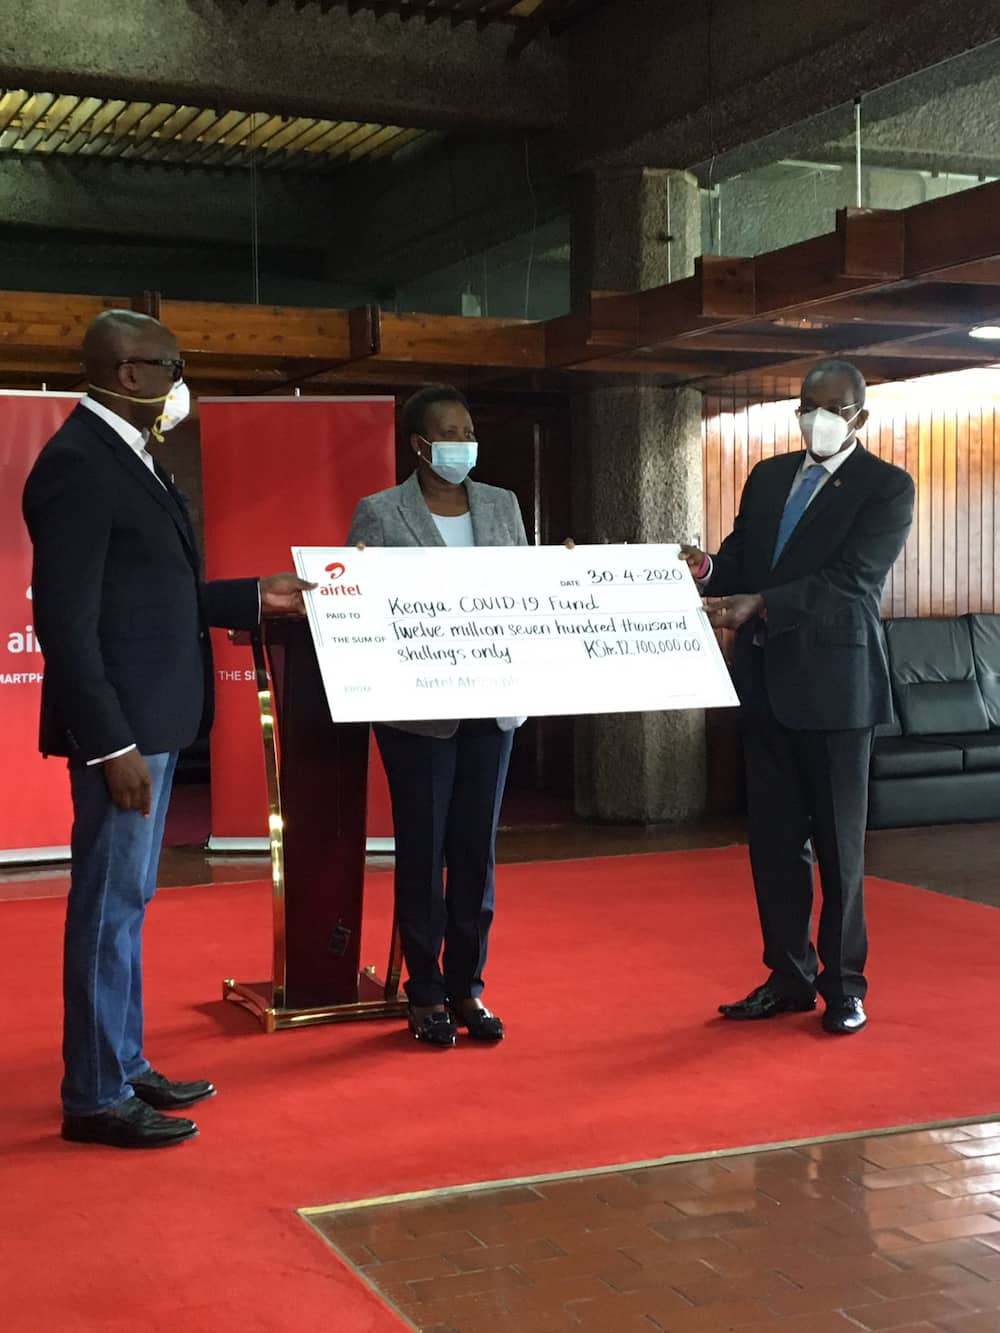 Airtel Kenya employees raise KSh 12.7 million from salaries to help in fight against COVID-19